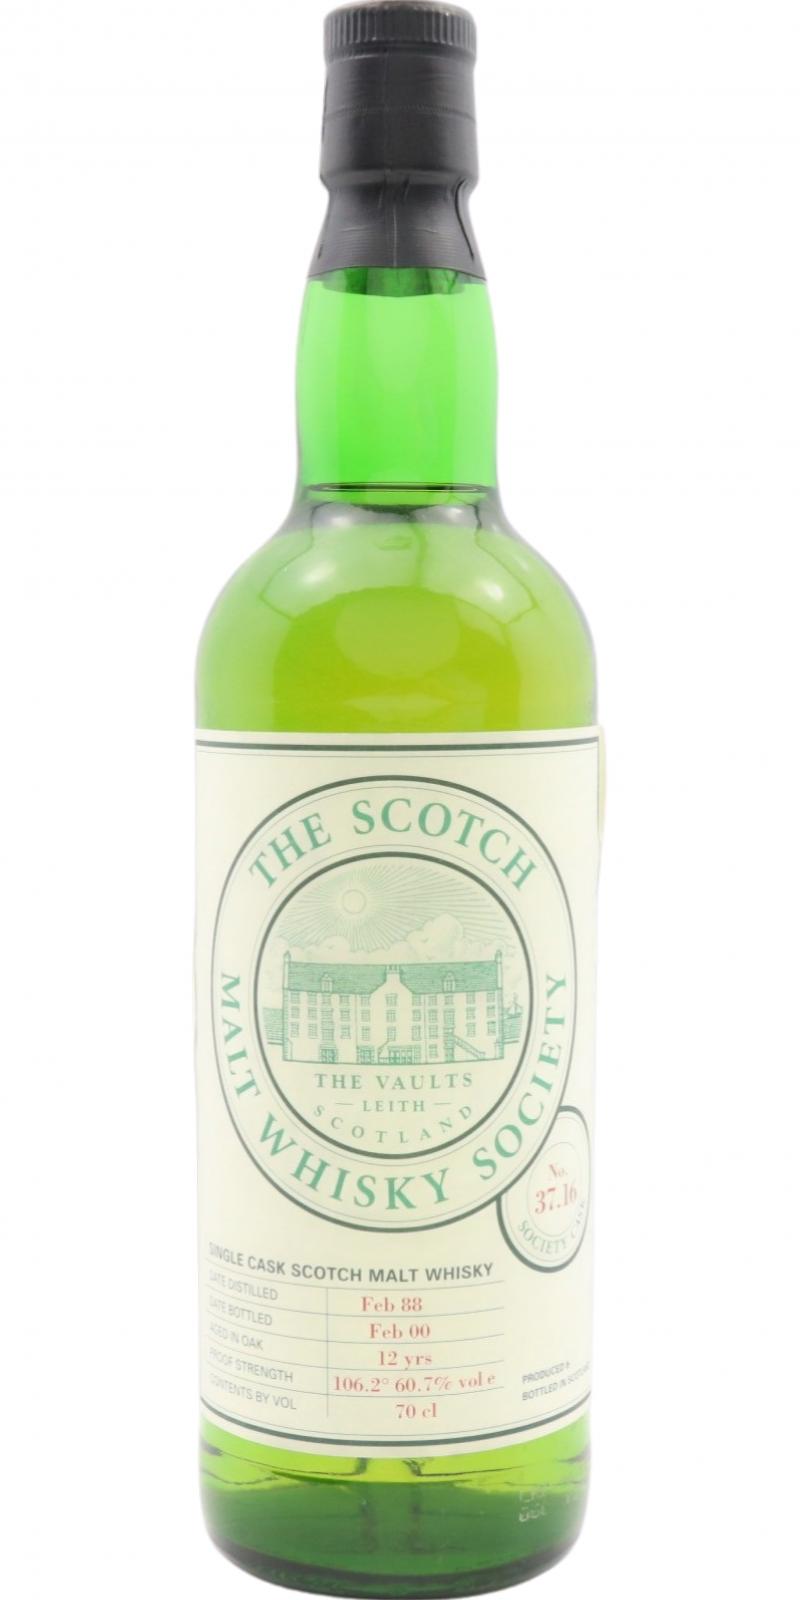 Cragganmore 1988 SMWS 37.16 Wet leather and pot-pouri 60.7% 700ml